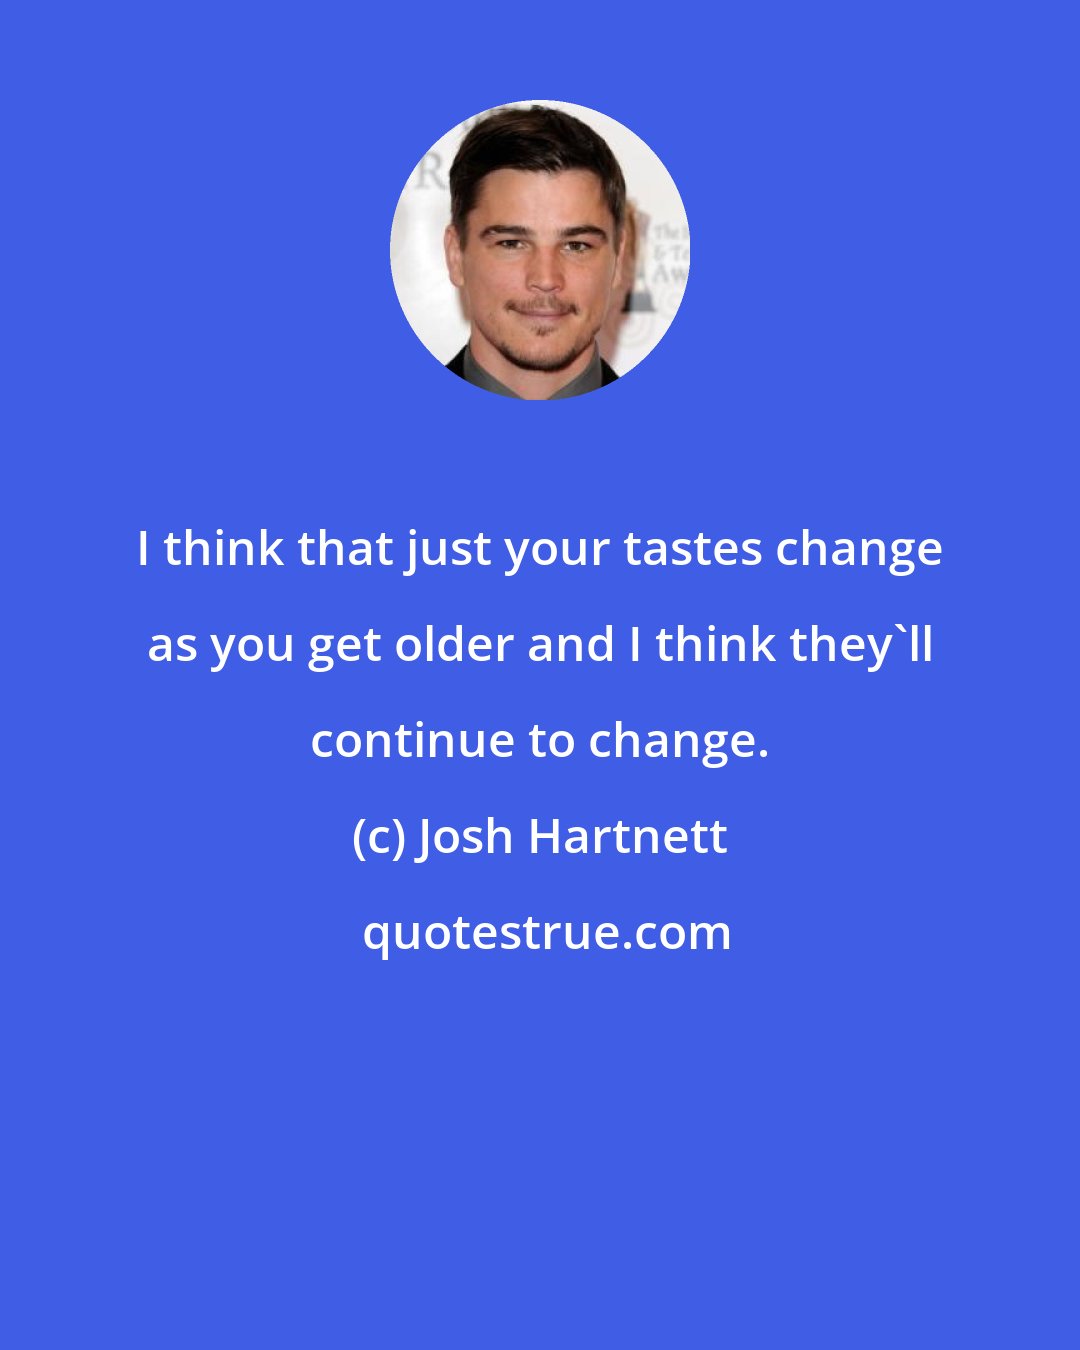 Josh Hartnett: I think that just your tastes change as you get older and I think they'll continue to change.